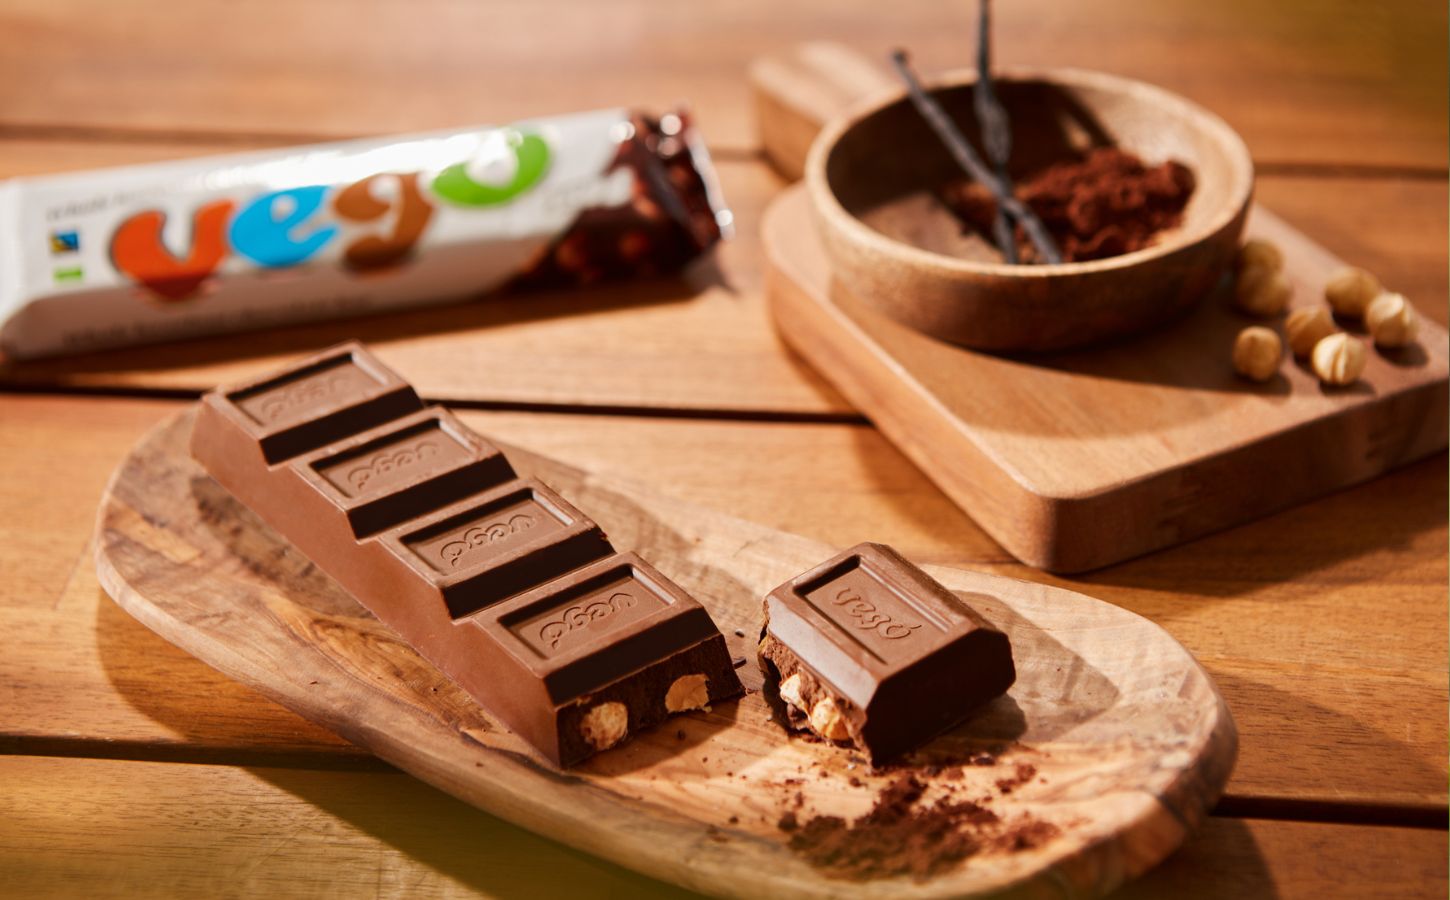 A dairy-free and vegan milk chocolate bar from Vego